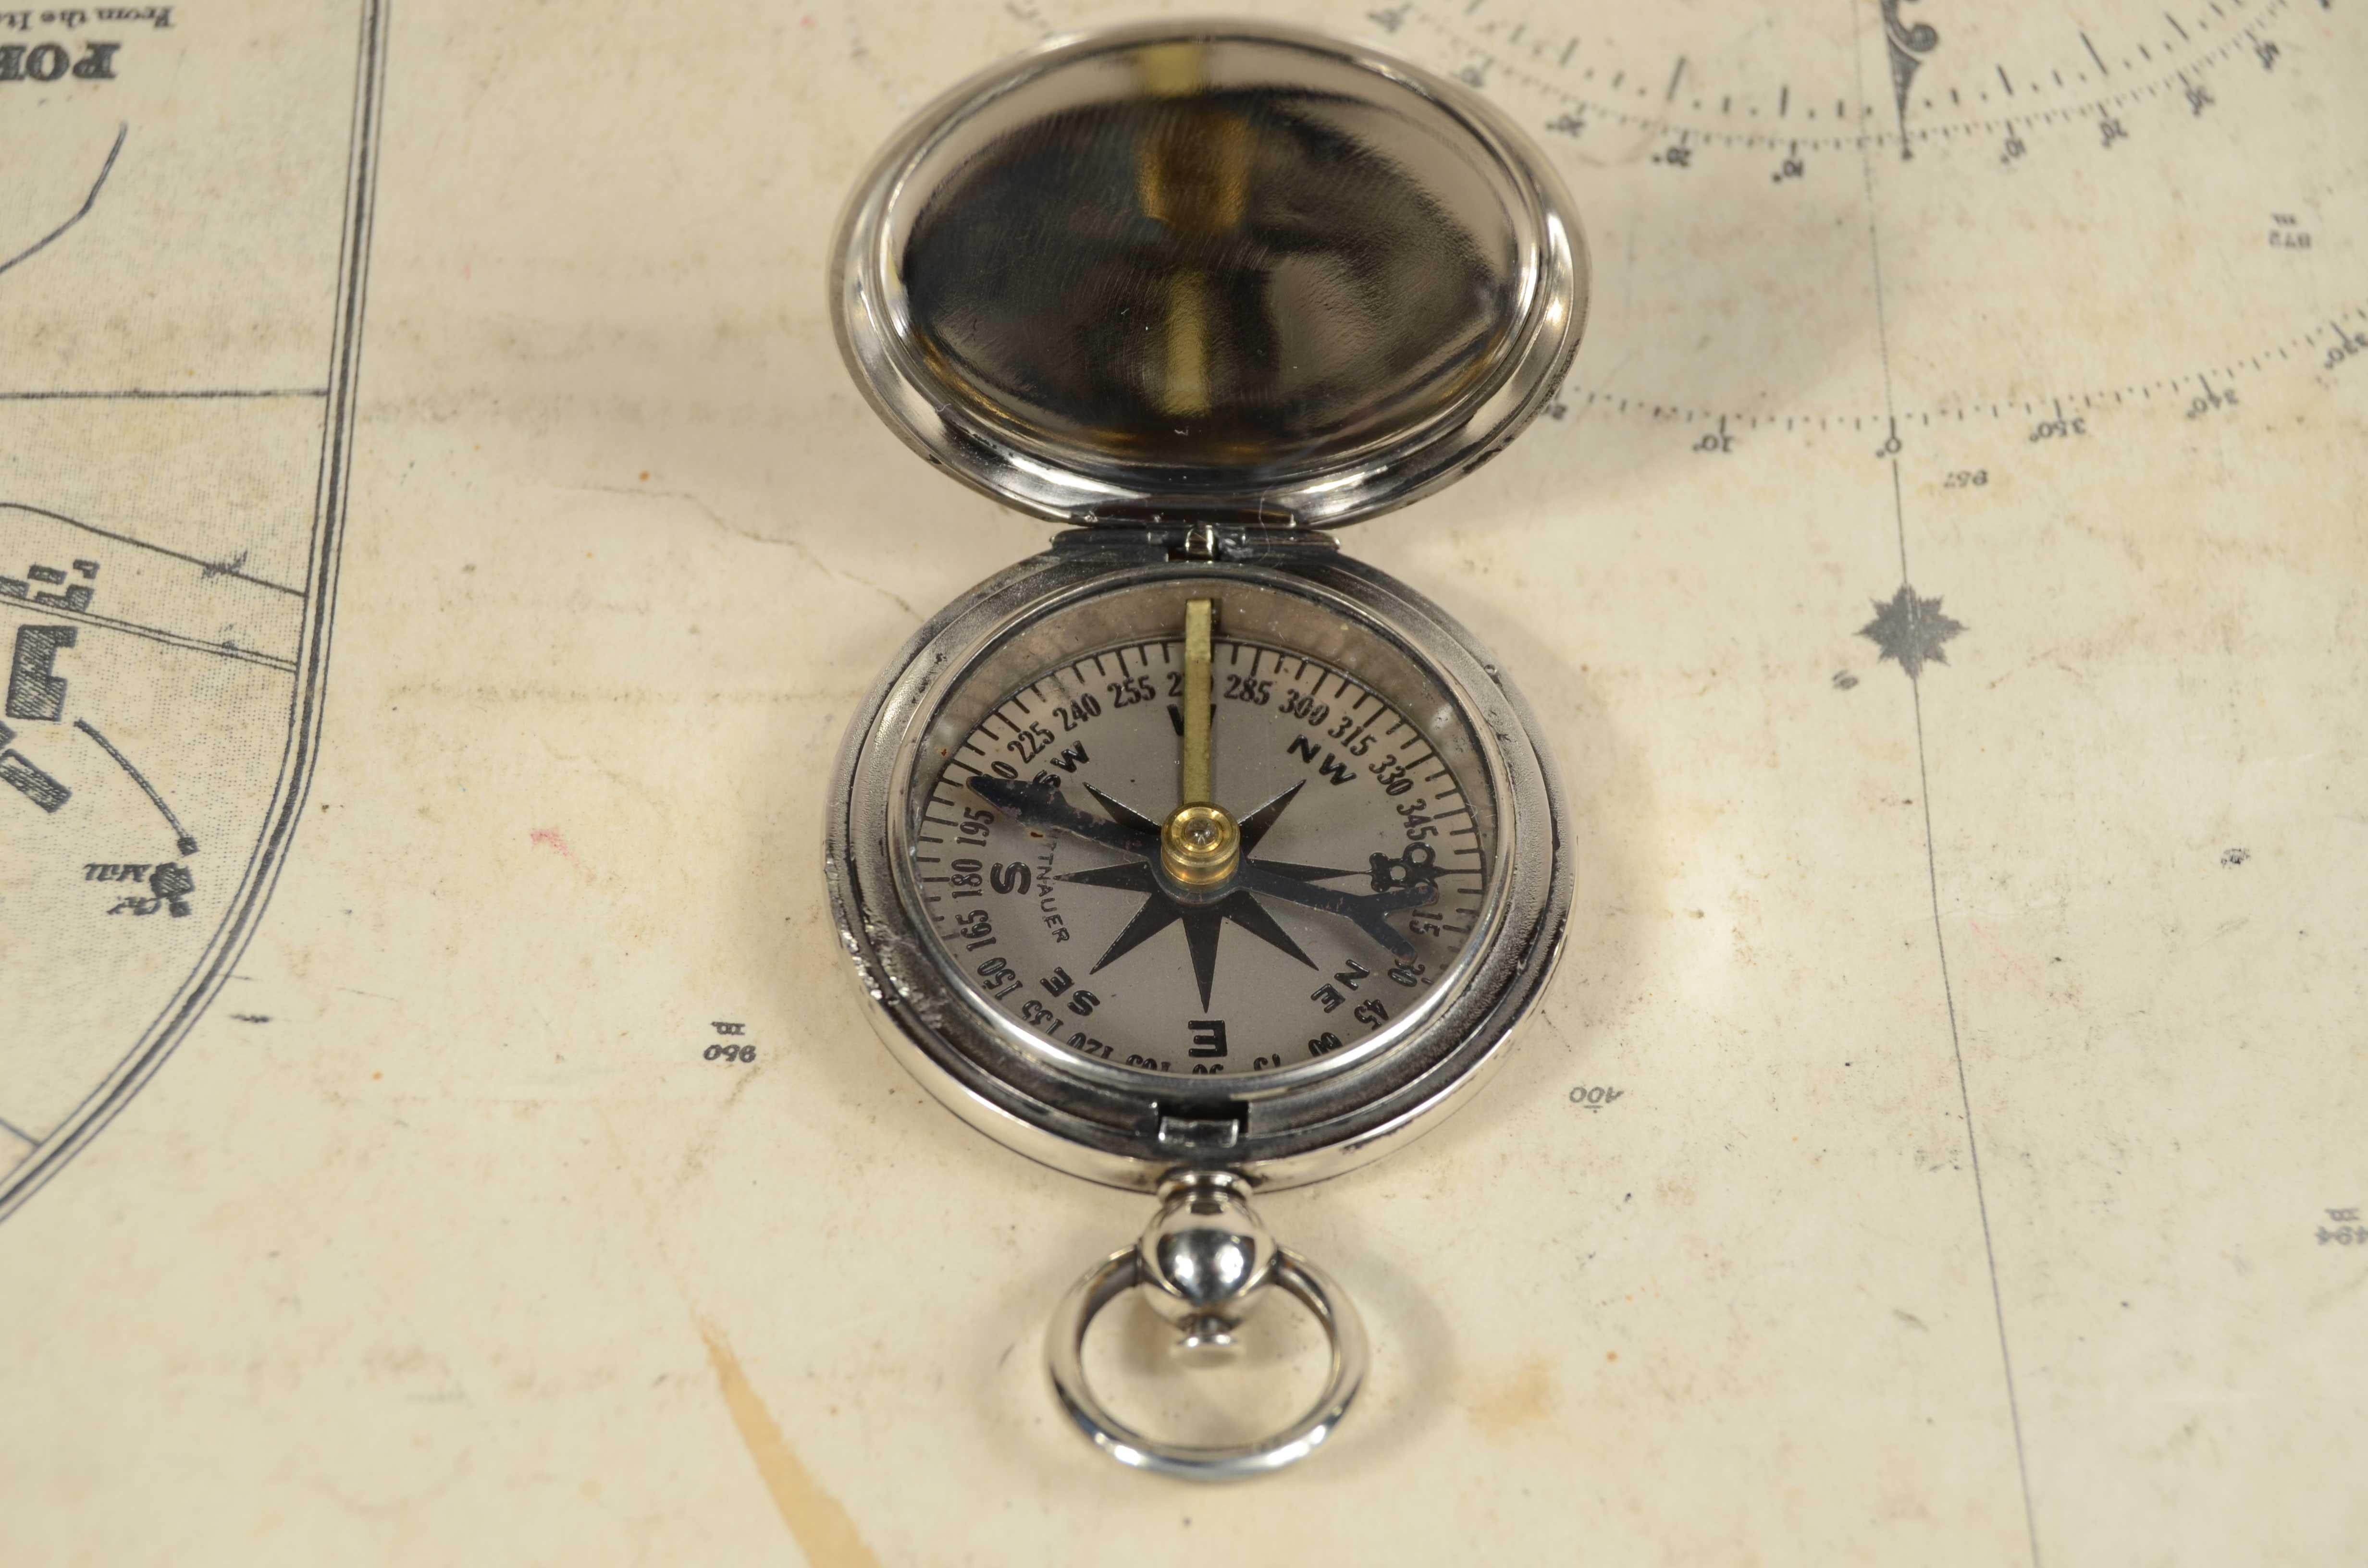 U.S. Army officer's pocket compass during World War I made of chrome-plated brass in the shape of an onion clock, signed WITTNAUER. 
The compass is equipped with a snap-lock cover with release button inside the ring. 
Eight-twenty rose. 
Excellent